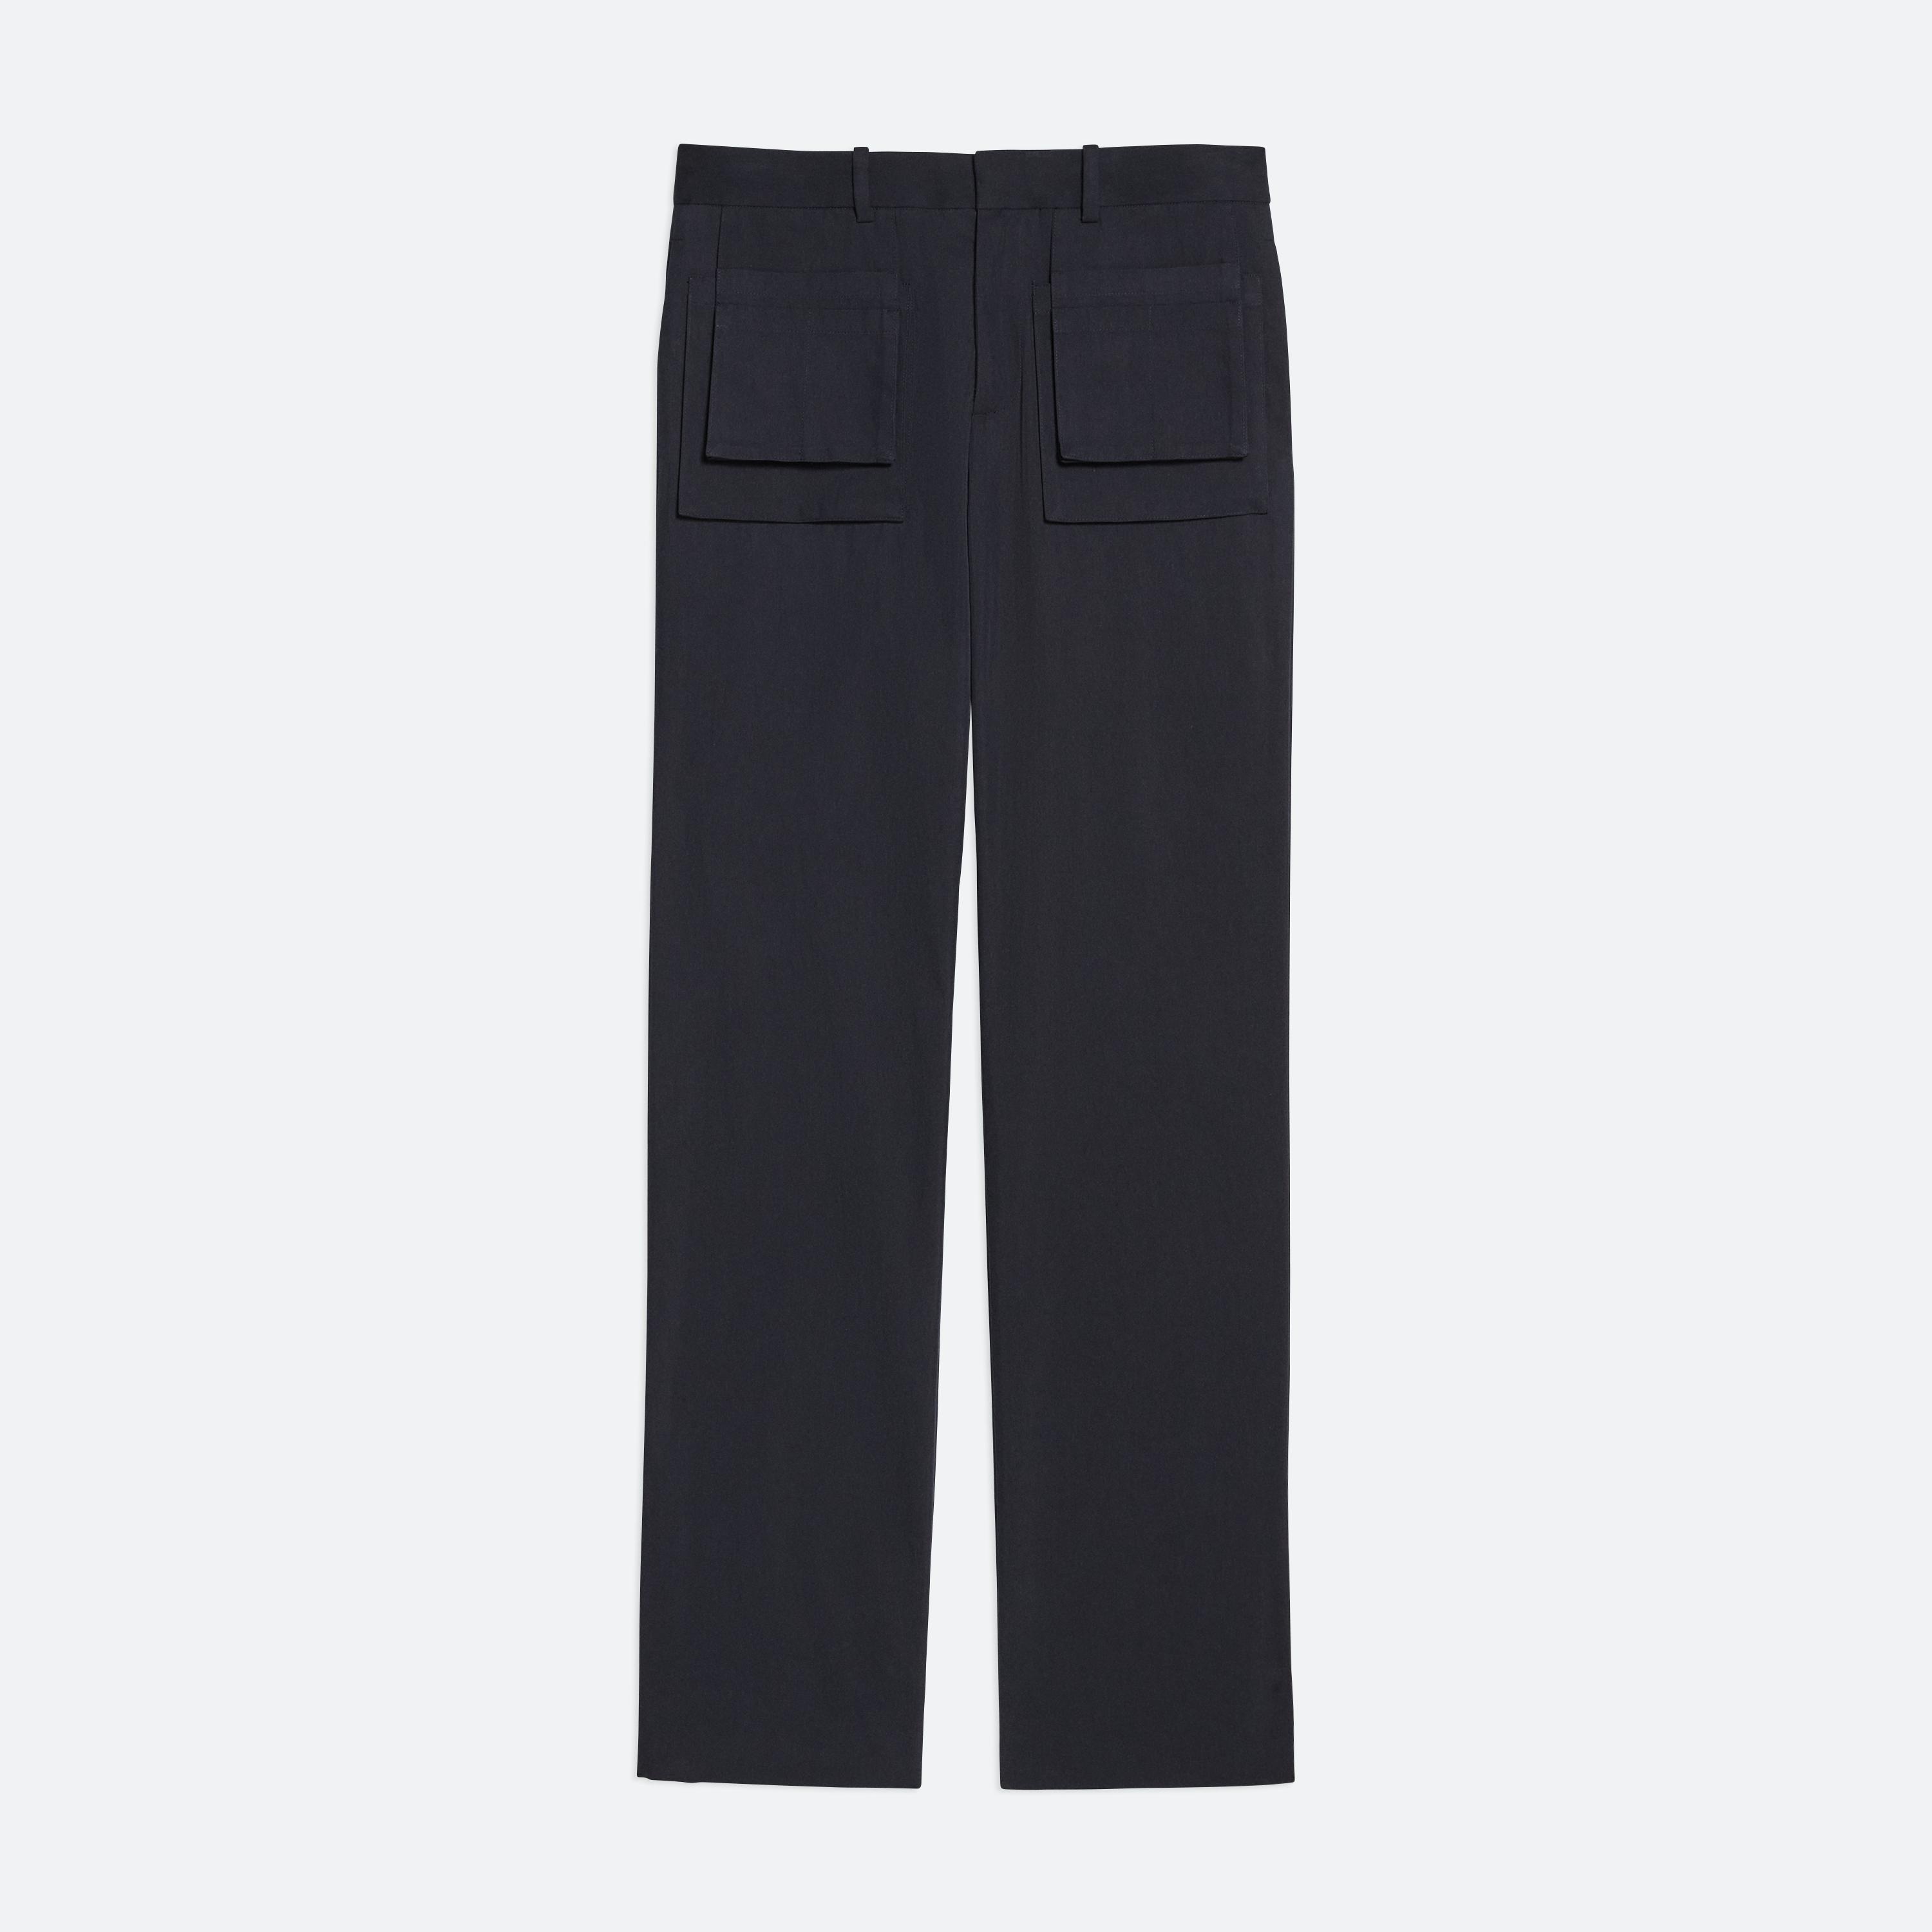 UTILITY CAR TROUSERS - 1